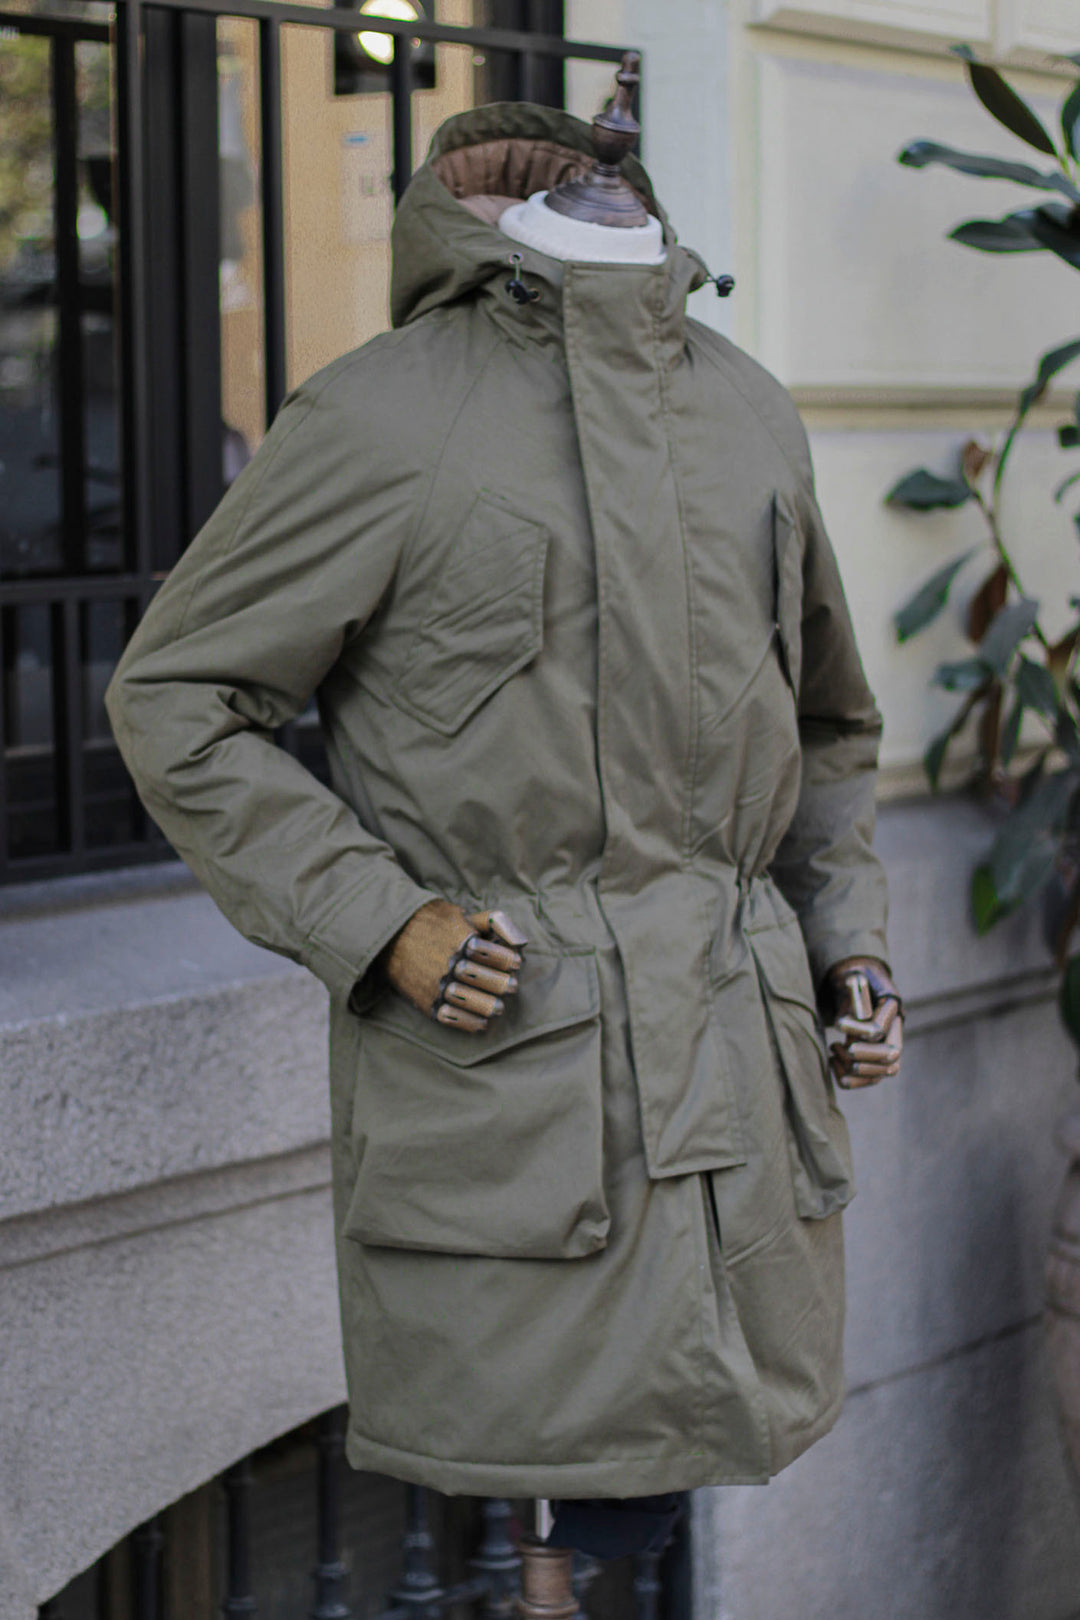 Hunting Green Technical Parka 320gr. Water Resistant